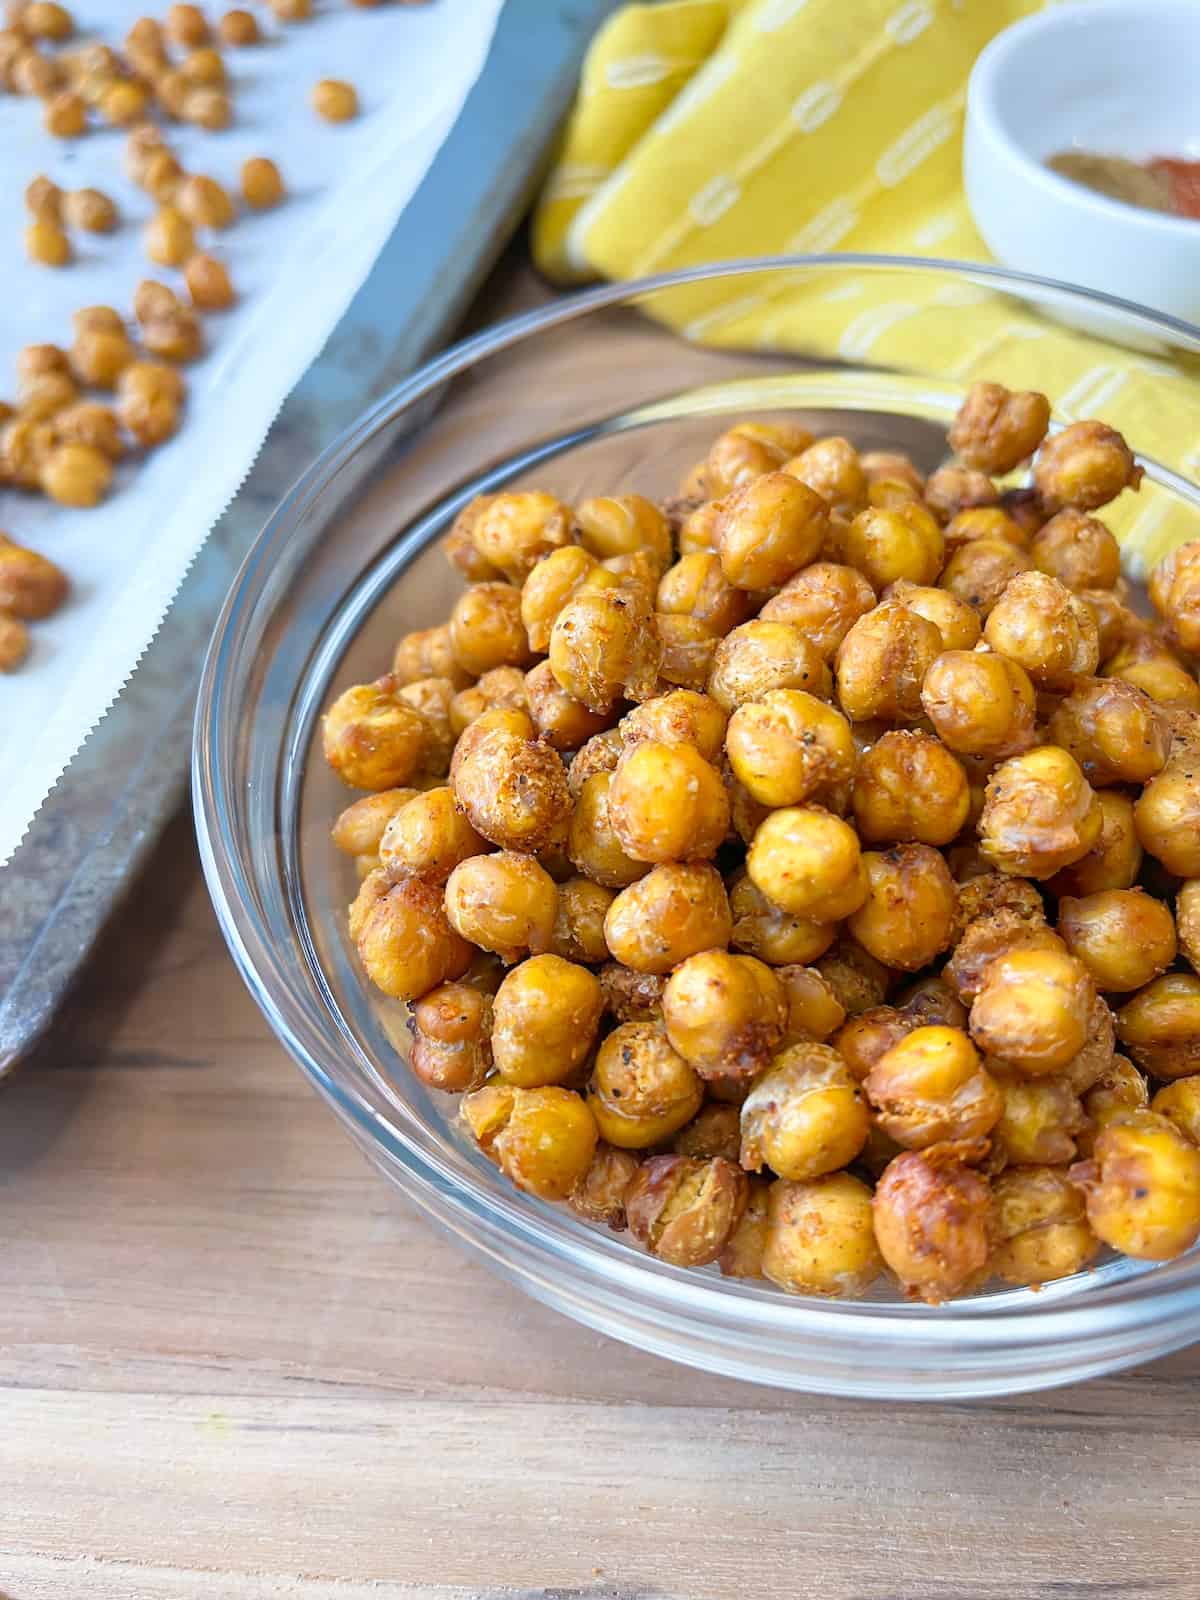 Mediterranean Roasted chickpeas with yellow towel behind